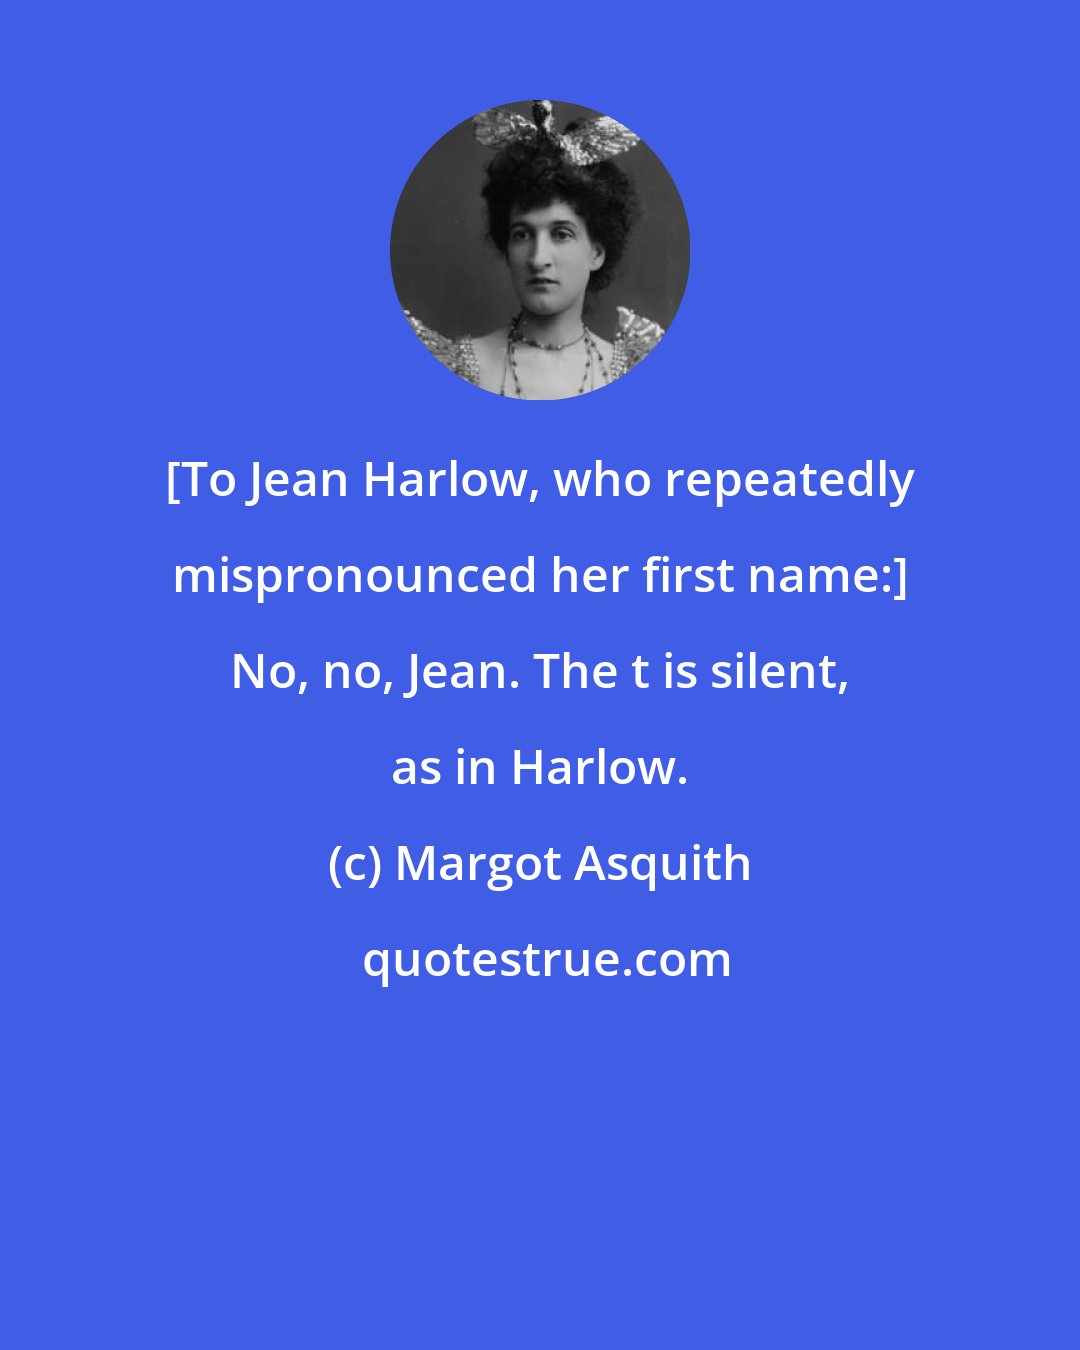 Margot Asquith: [To Jean Harlow, who repeatedly mispronounced her first name:] No, no, Jean. The t is silent, as in Harlow.